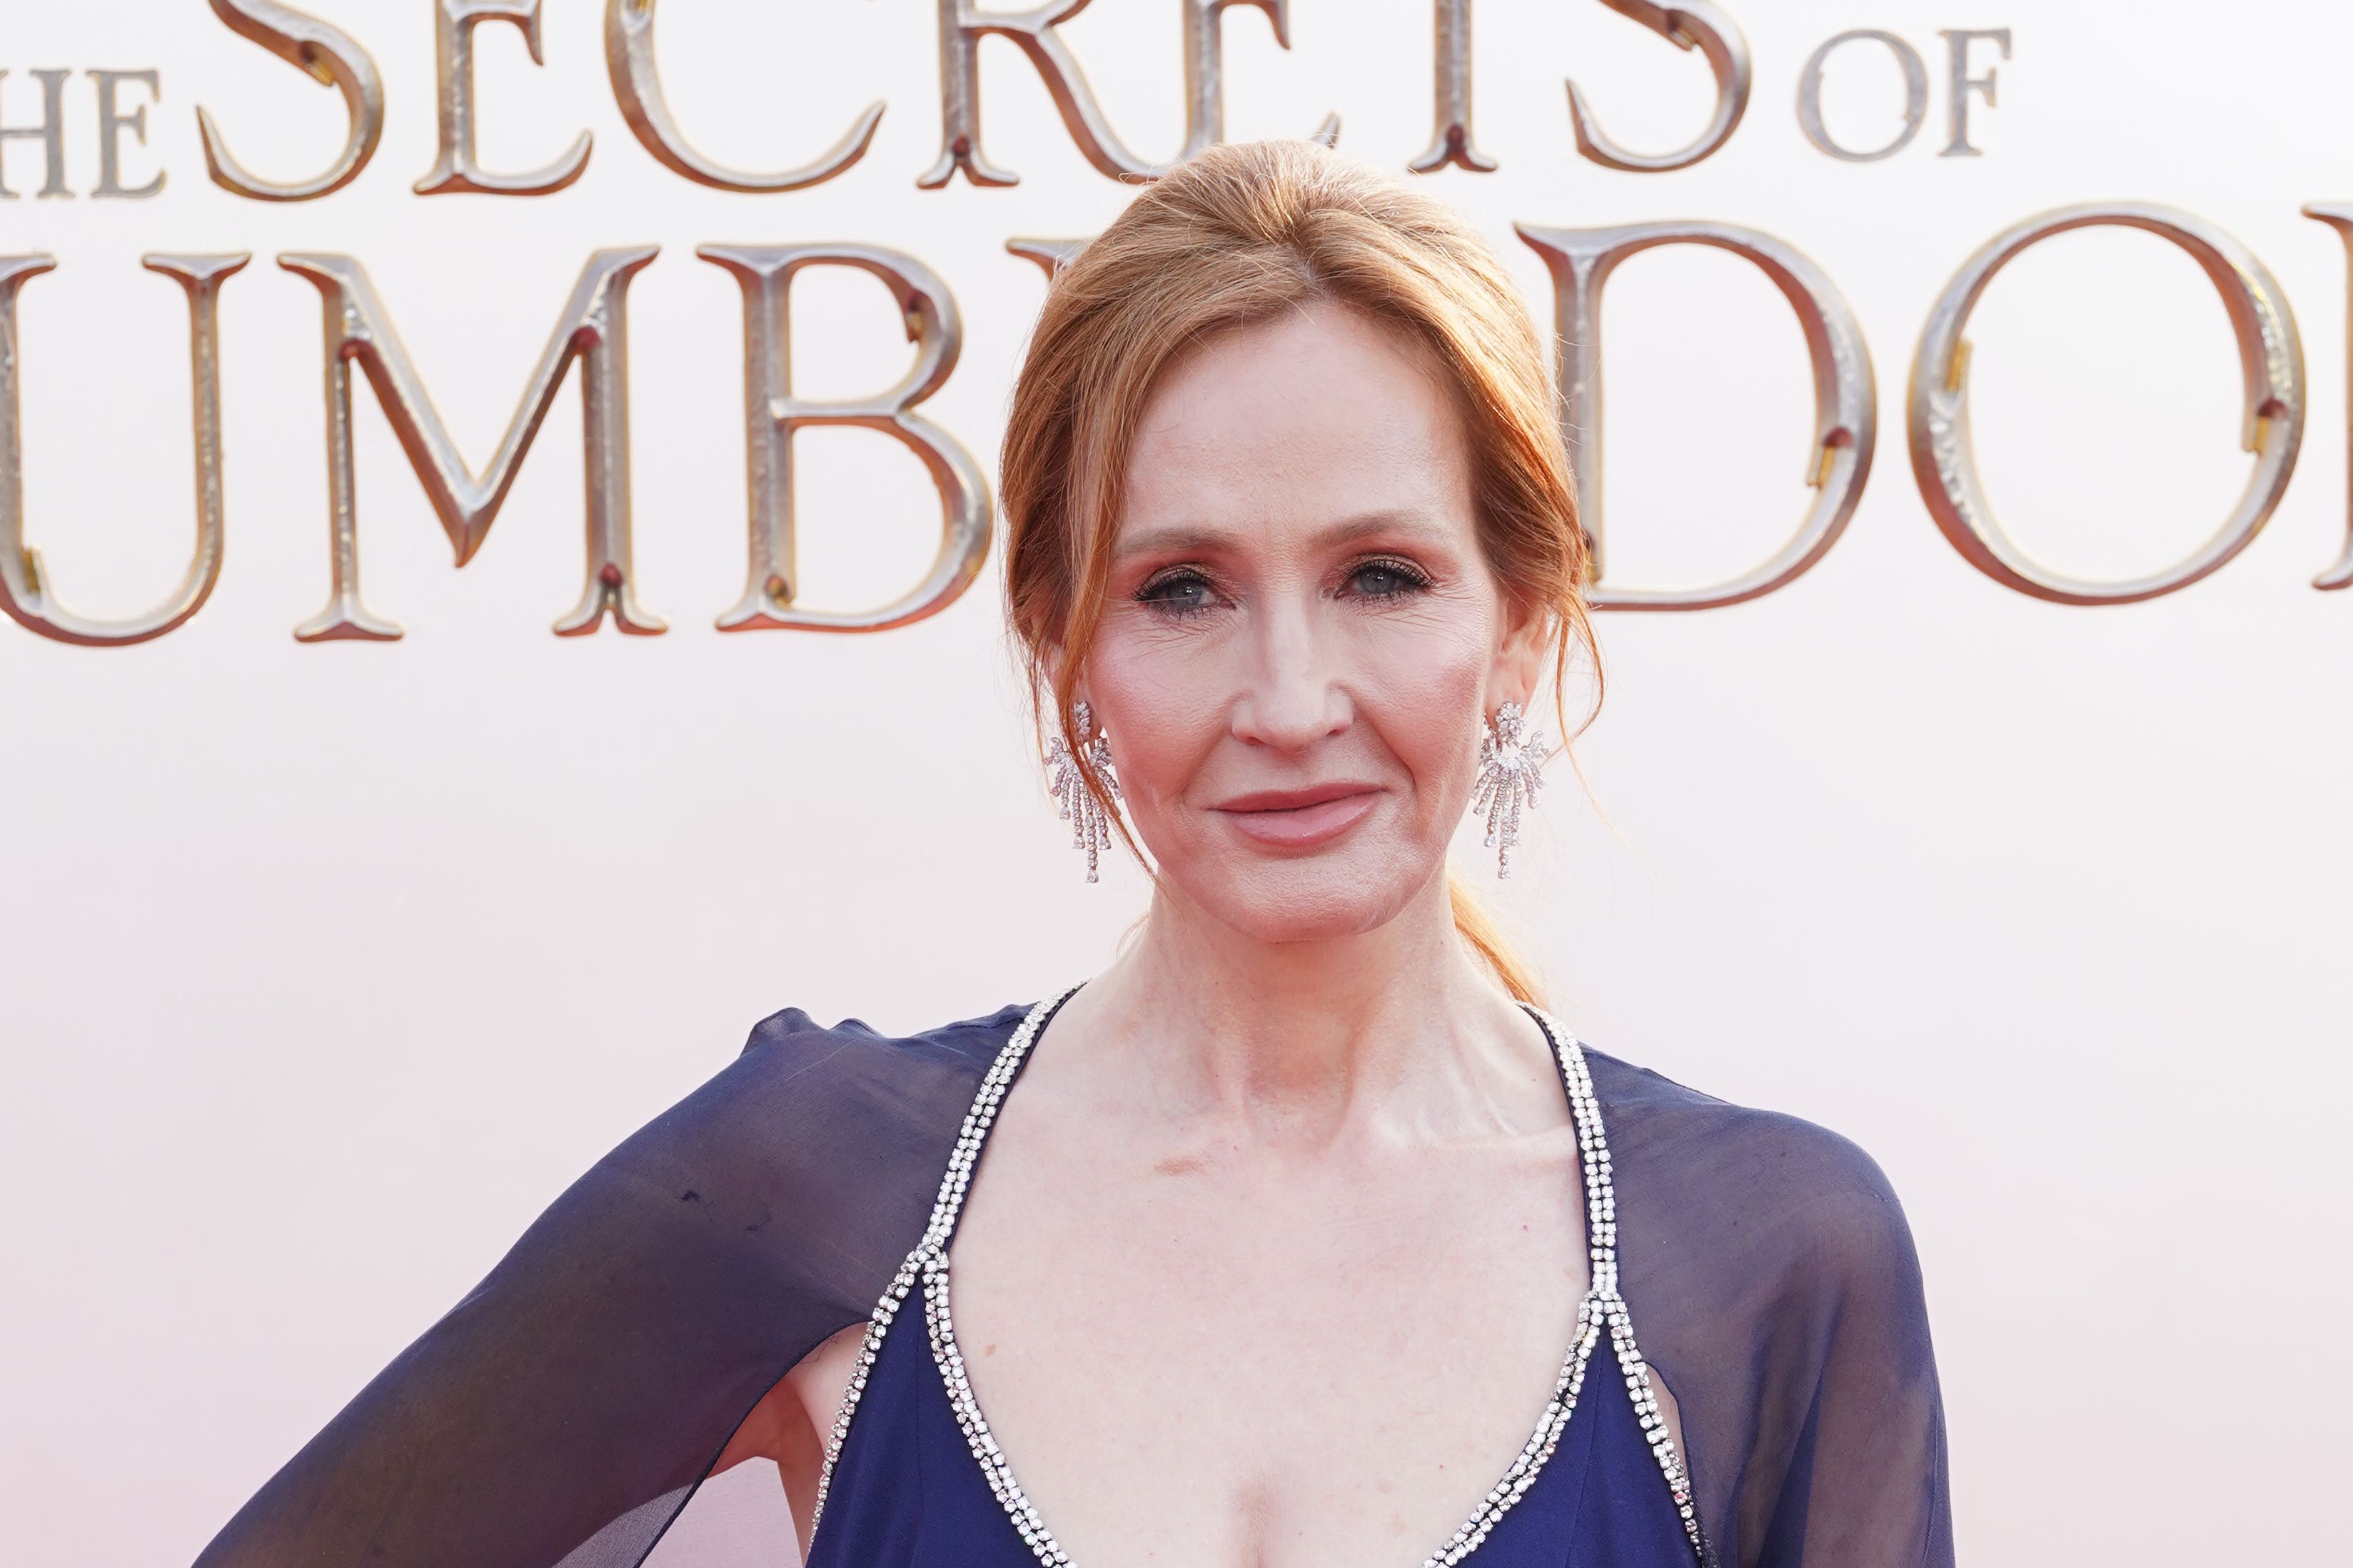 JK Rowling has said ‘I never set out to upset anyone’ over transgender views